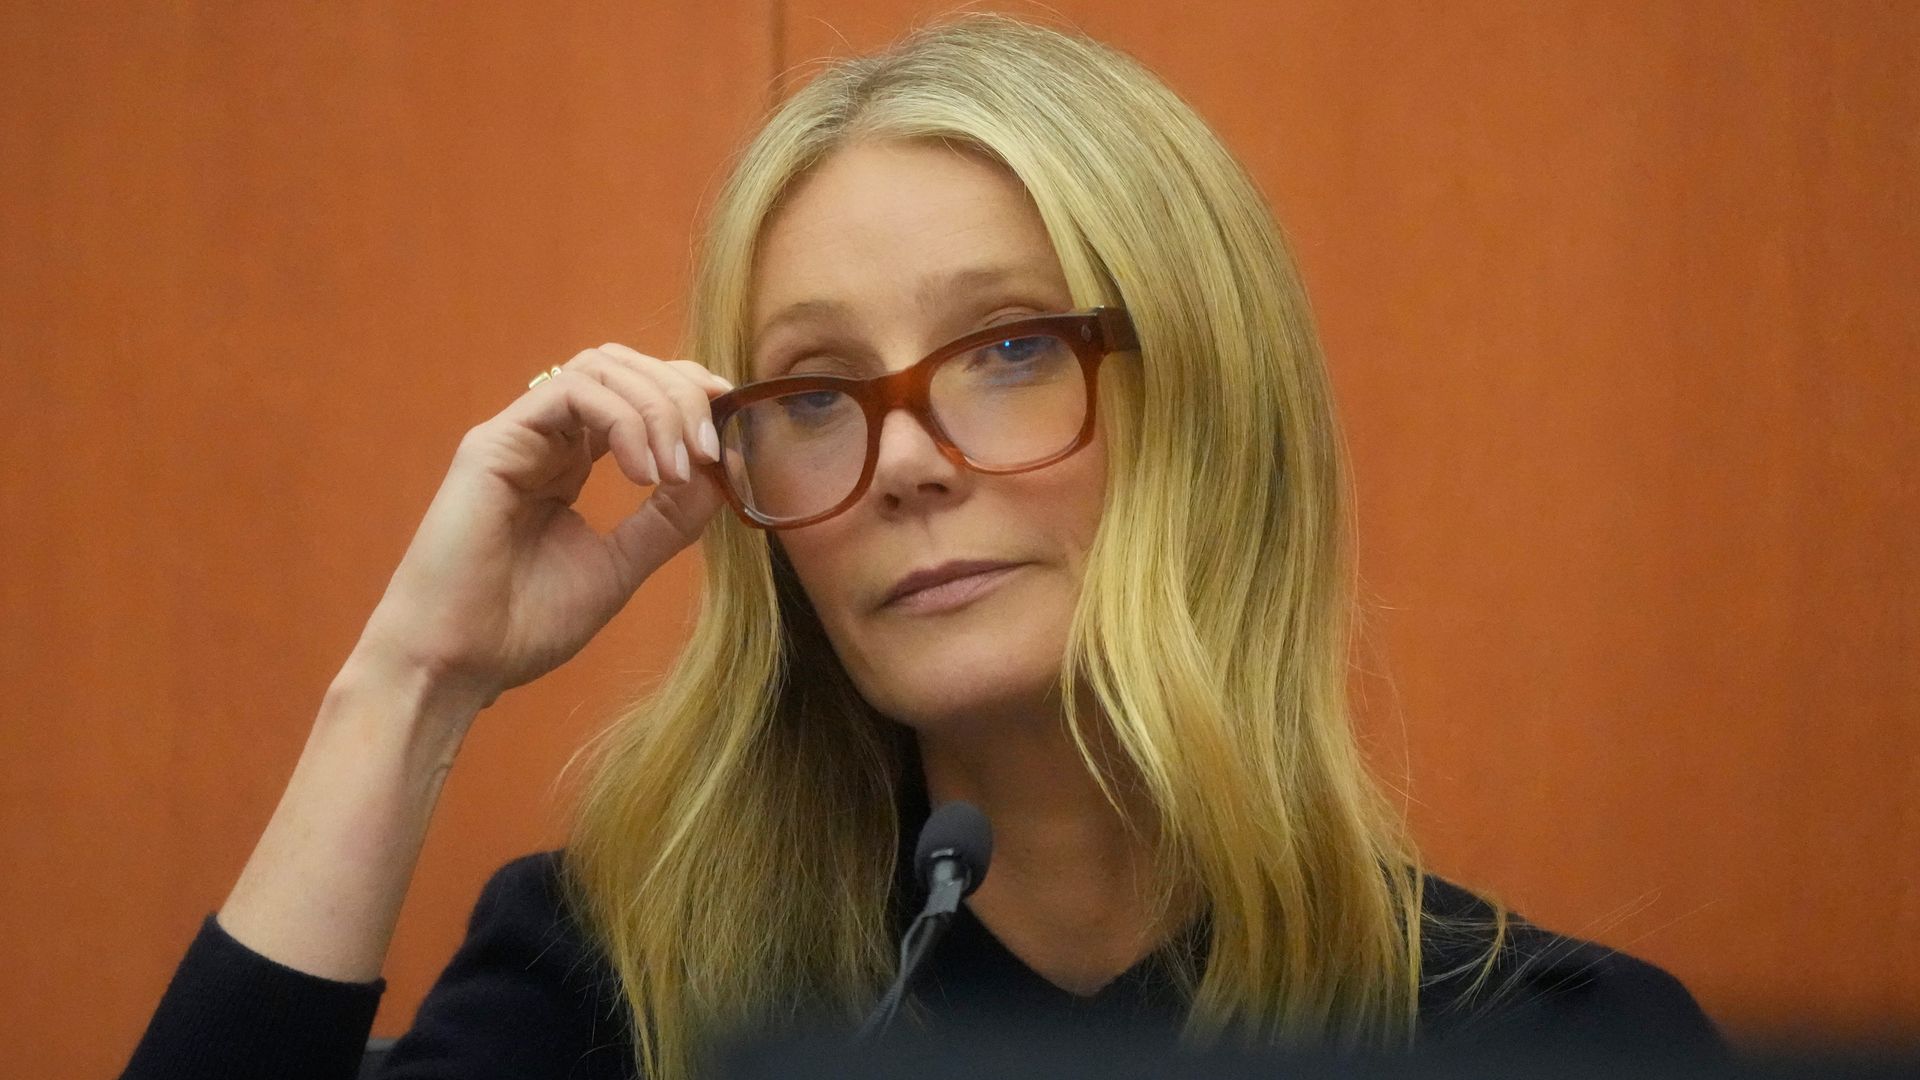 PARK CITY, UTAH - MARCH 24: Gwyneth Paltrow testifies during her trial on March 24, 2023, in Park City, Utah. Terry Sanderson is suing actress Gwyneth Paltrow for $300,000, claiming she recklessly crashed into him while the two were skiing on a beginner r